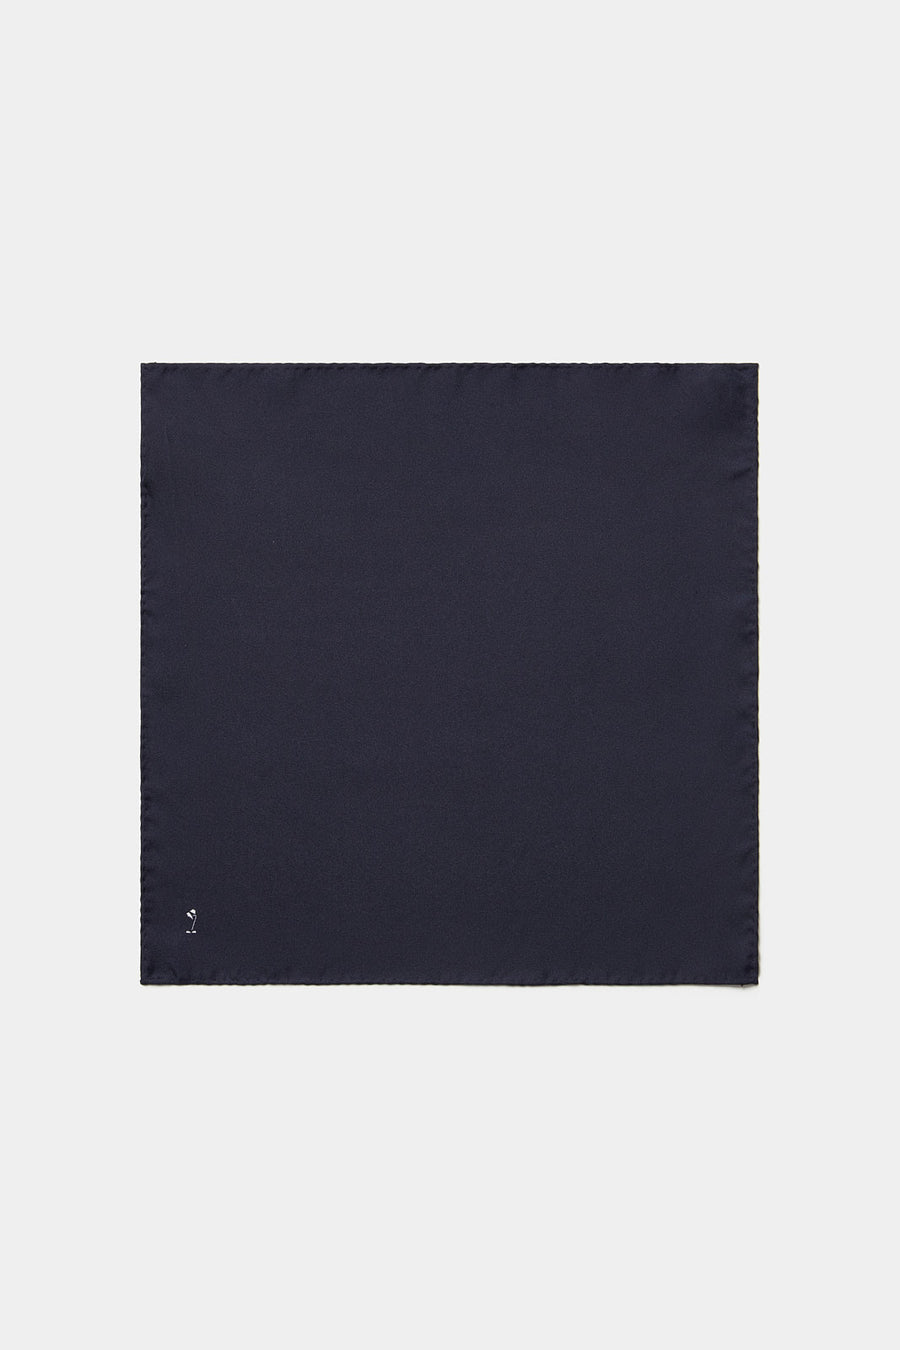 Classic Silk Pocket Square in Navy Blue